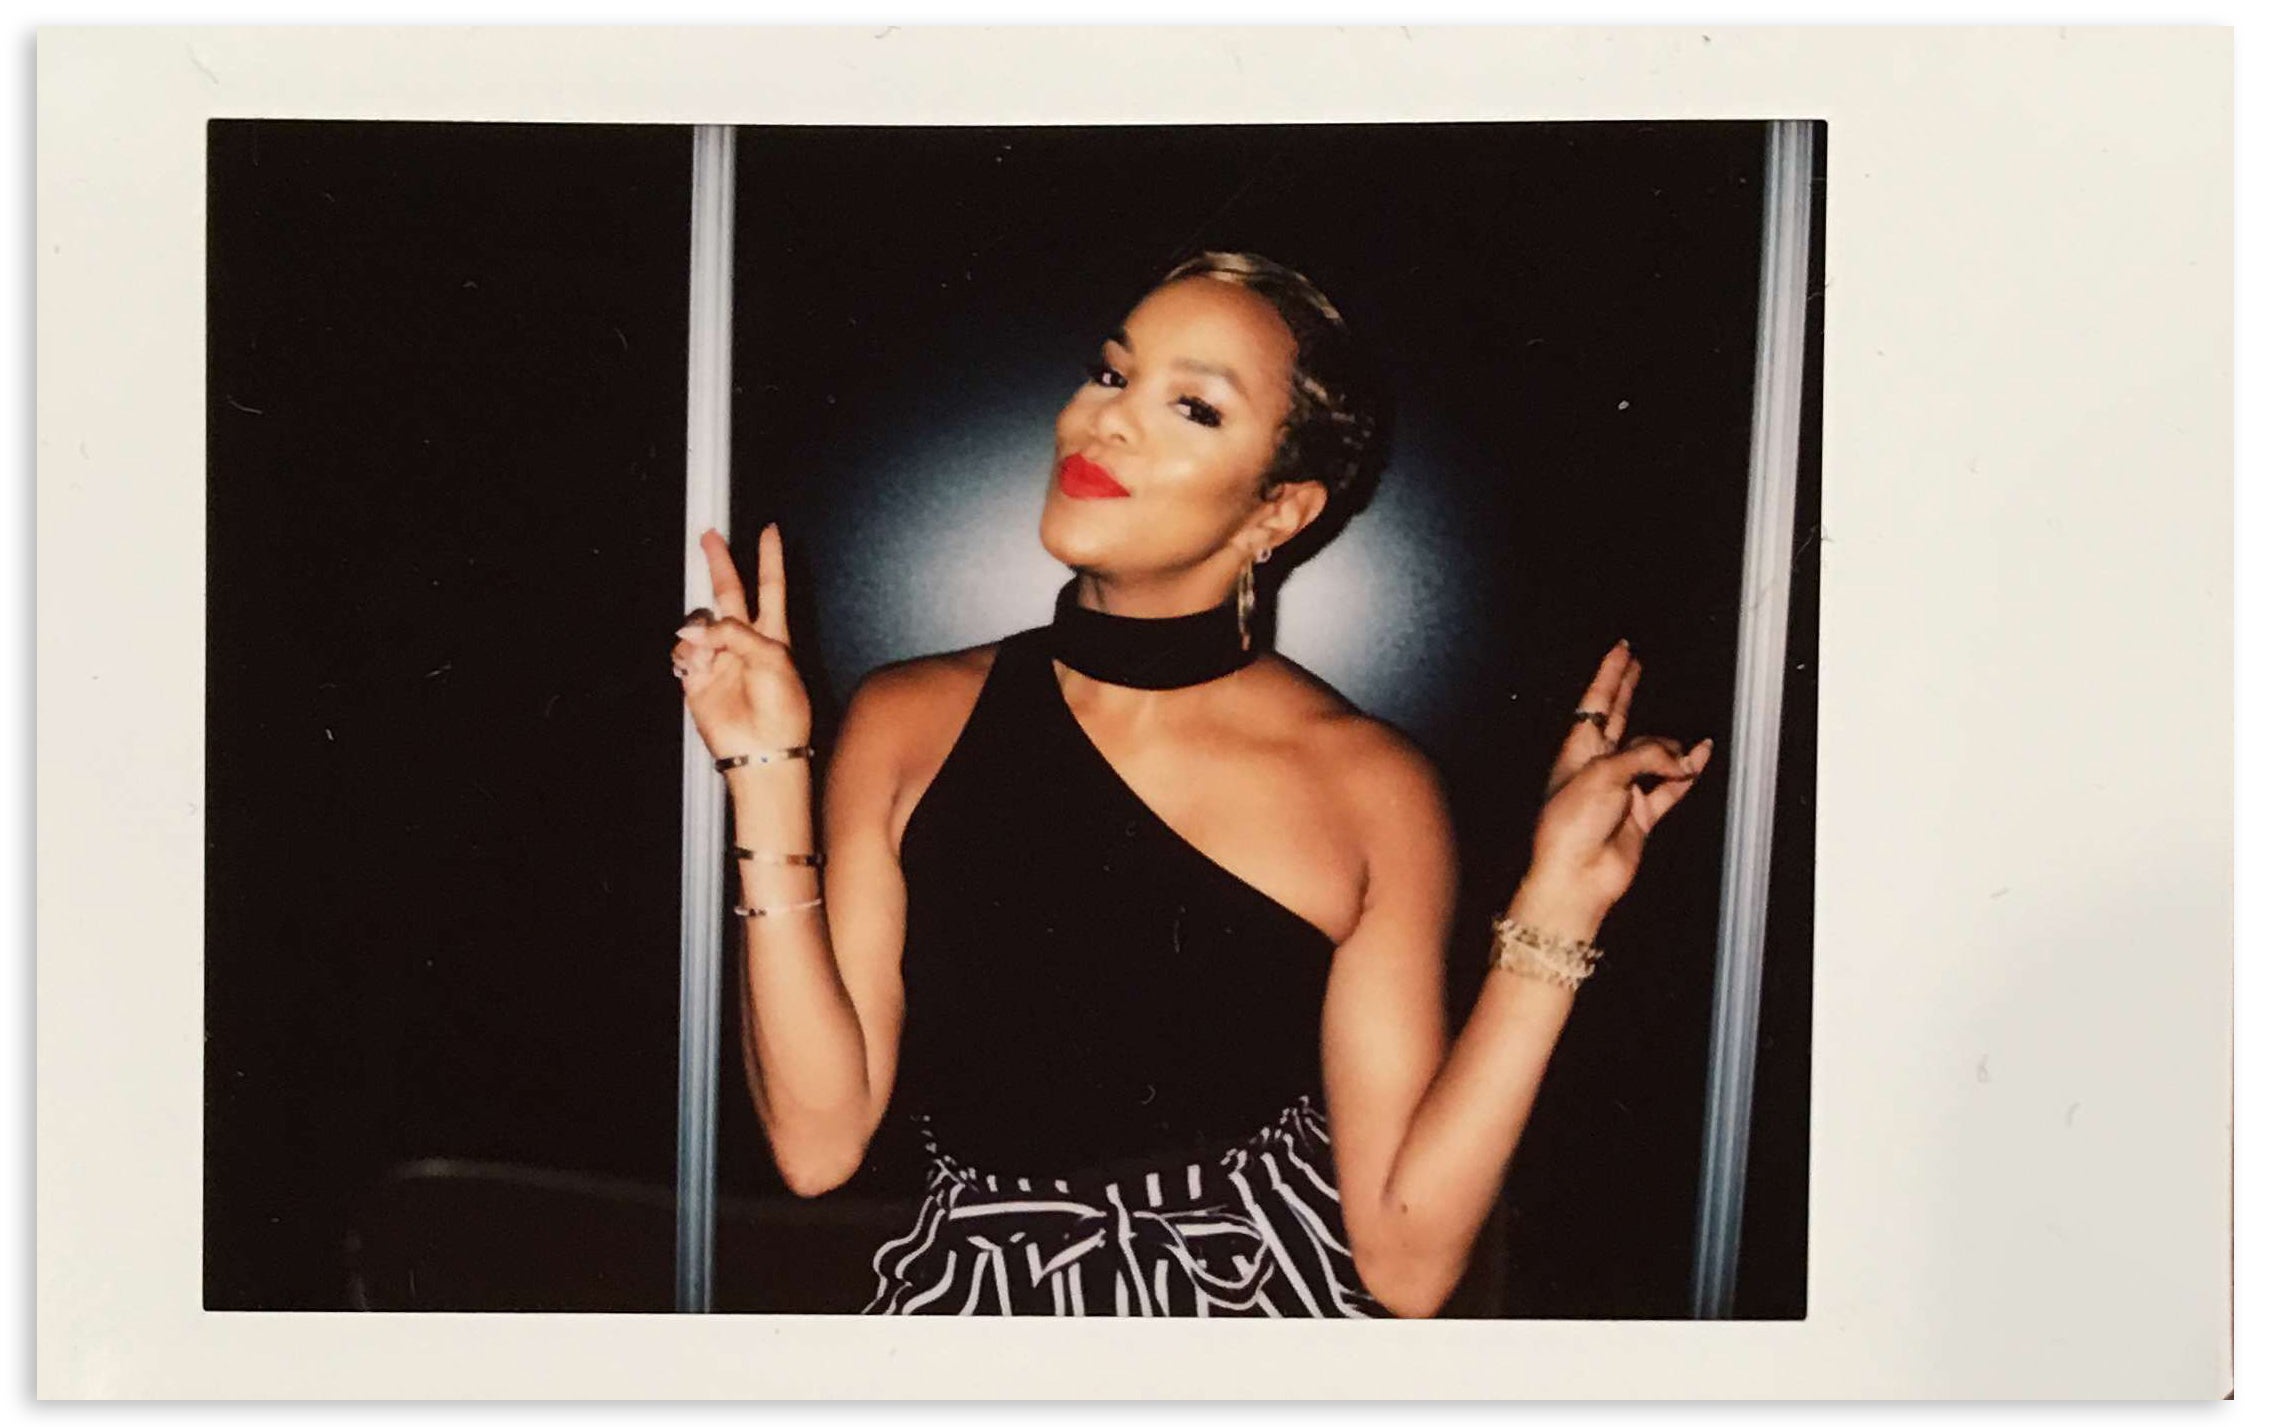 Check Out These Retro Snaps of Celebs at Essence Festival!